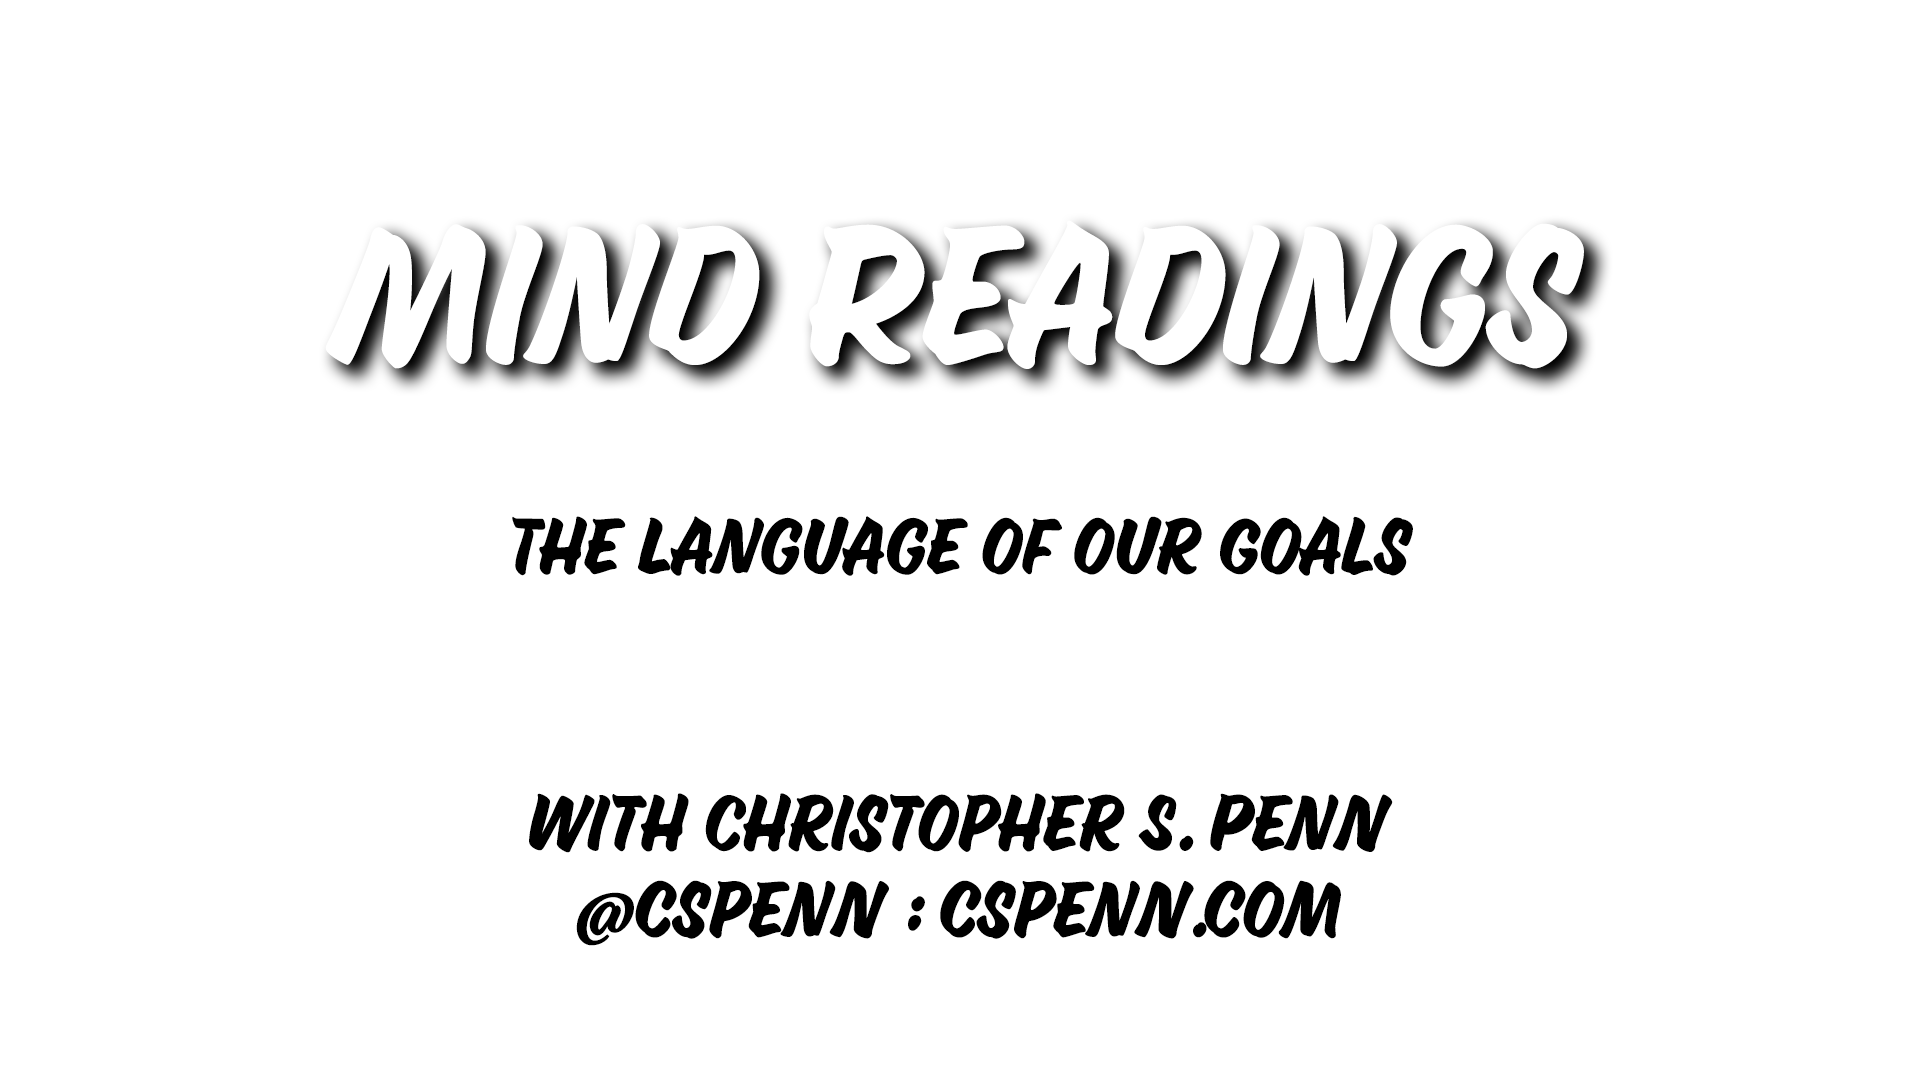 Mind Readings: The Language of Our Goals